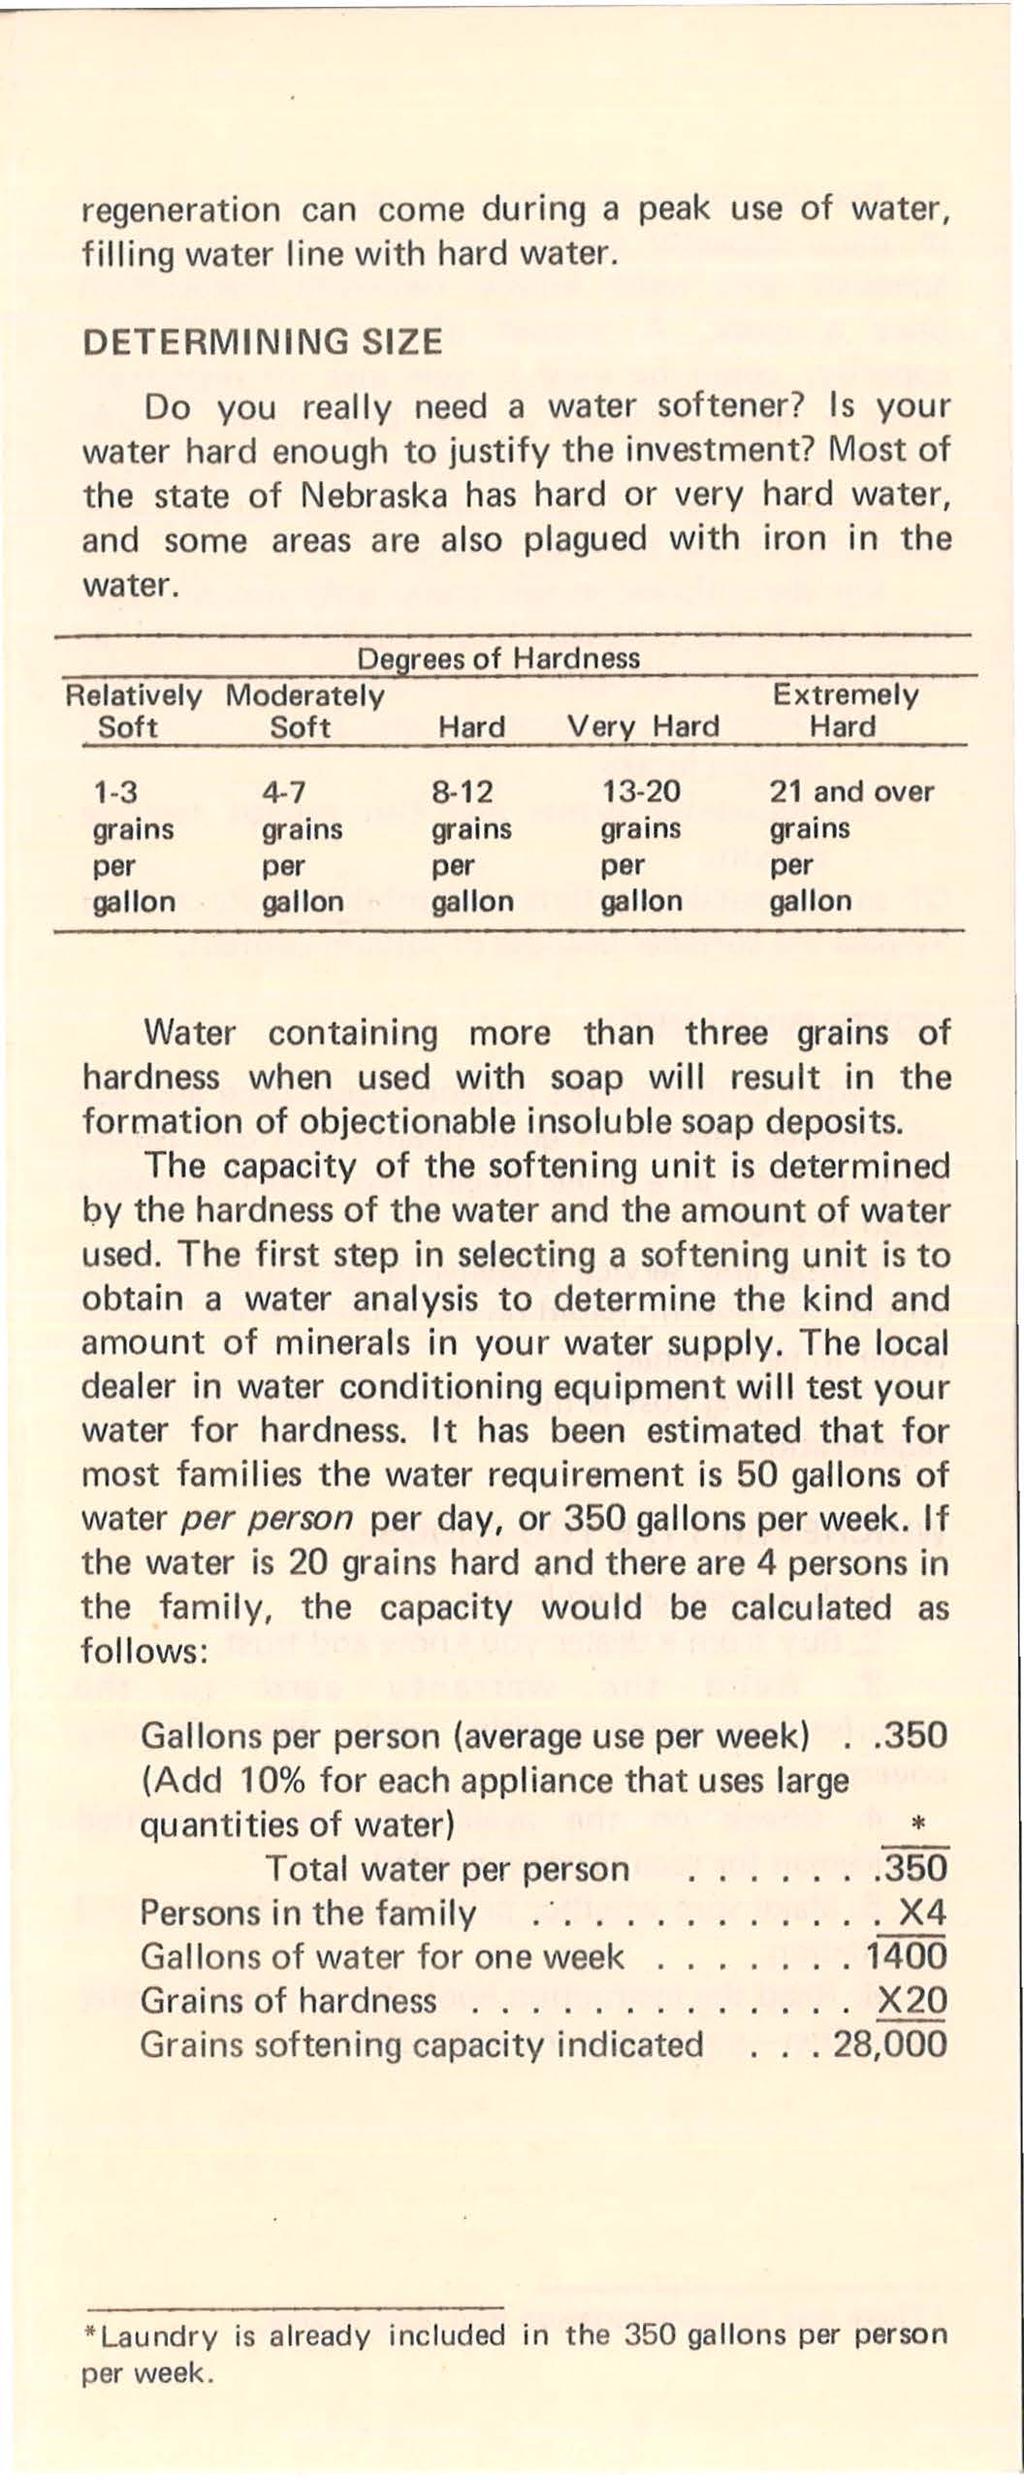 regeneration can come during a peak use of water, filling water line with hard water. DETERMINING SIZE Do you really need a water softener? Is your water hard enough to justify the investment?